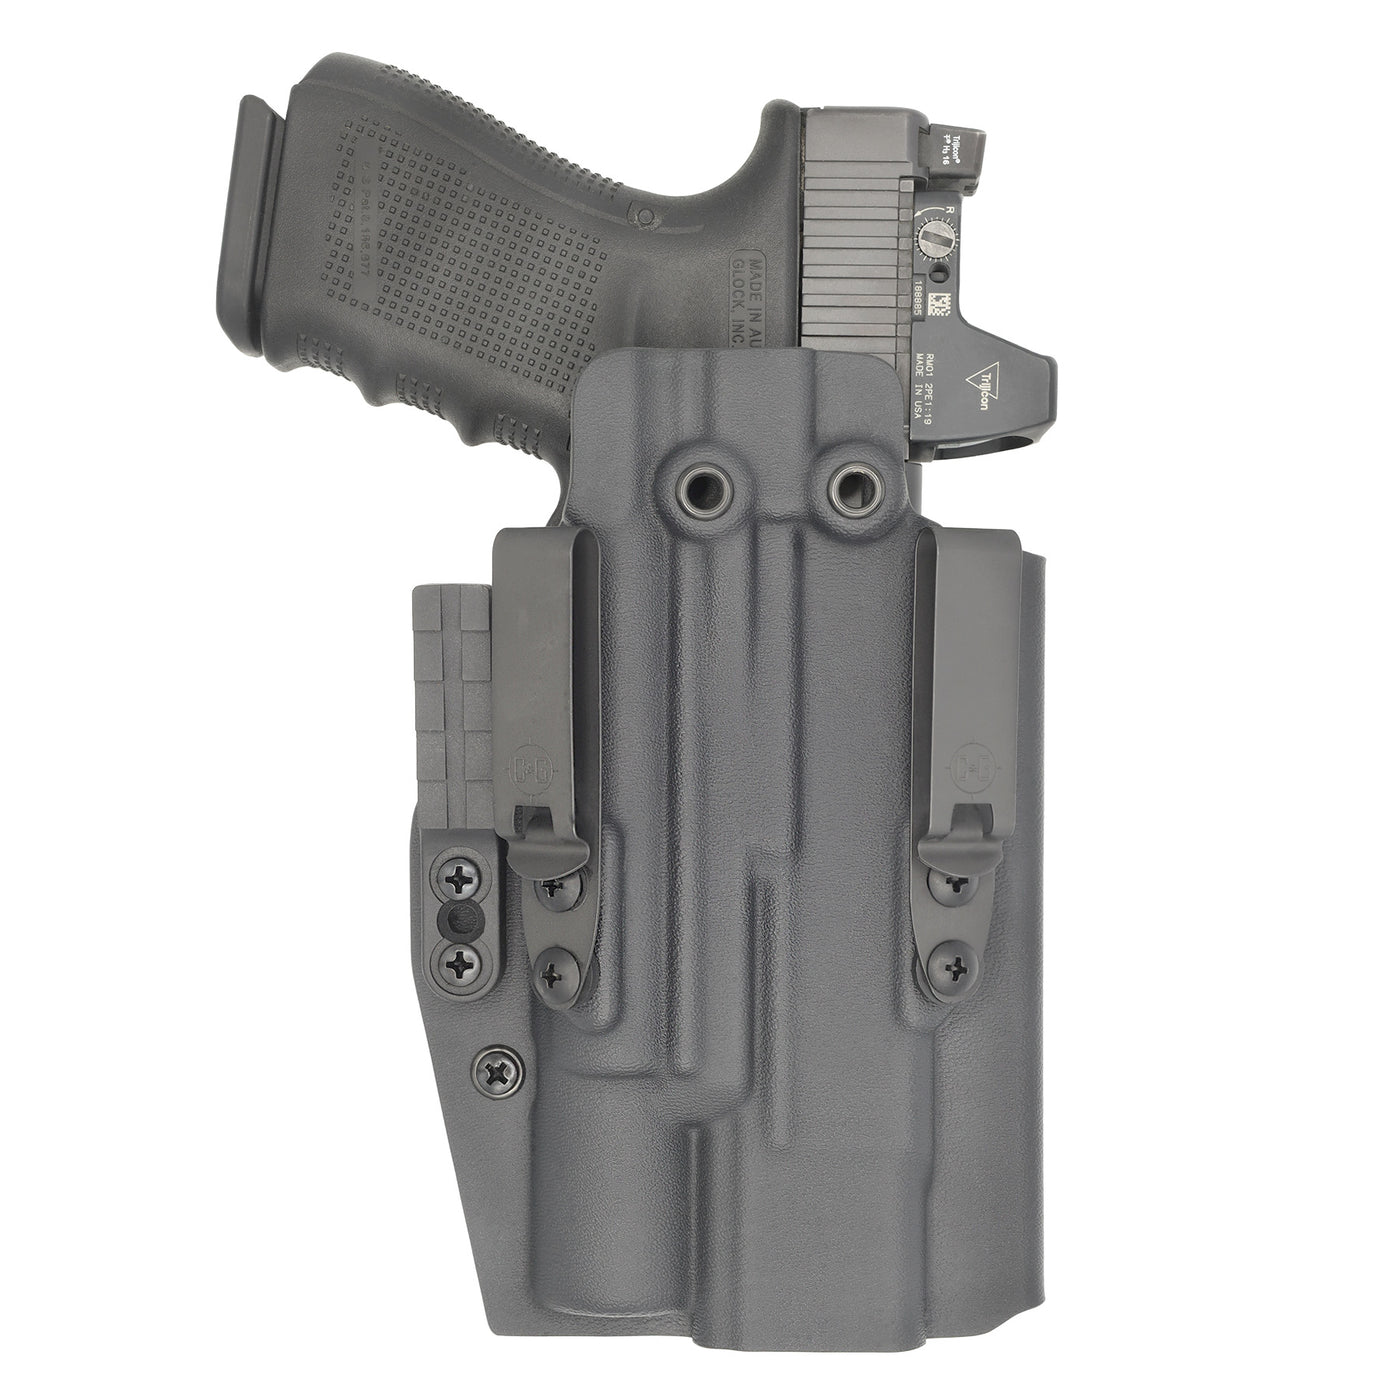 C&G Holsters Quickship IWB ALPHA UPGRADE Tactical Poly80 Surefire X300 in holstered position